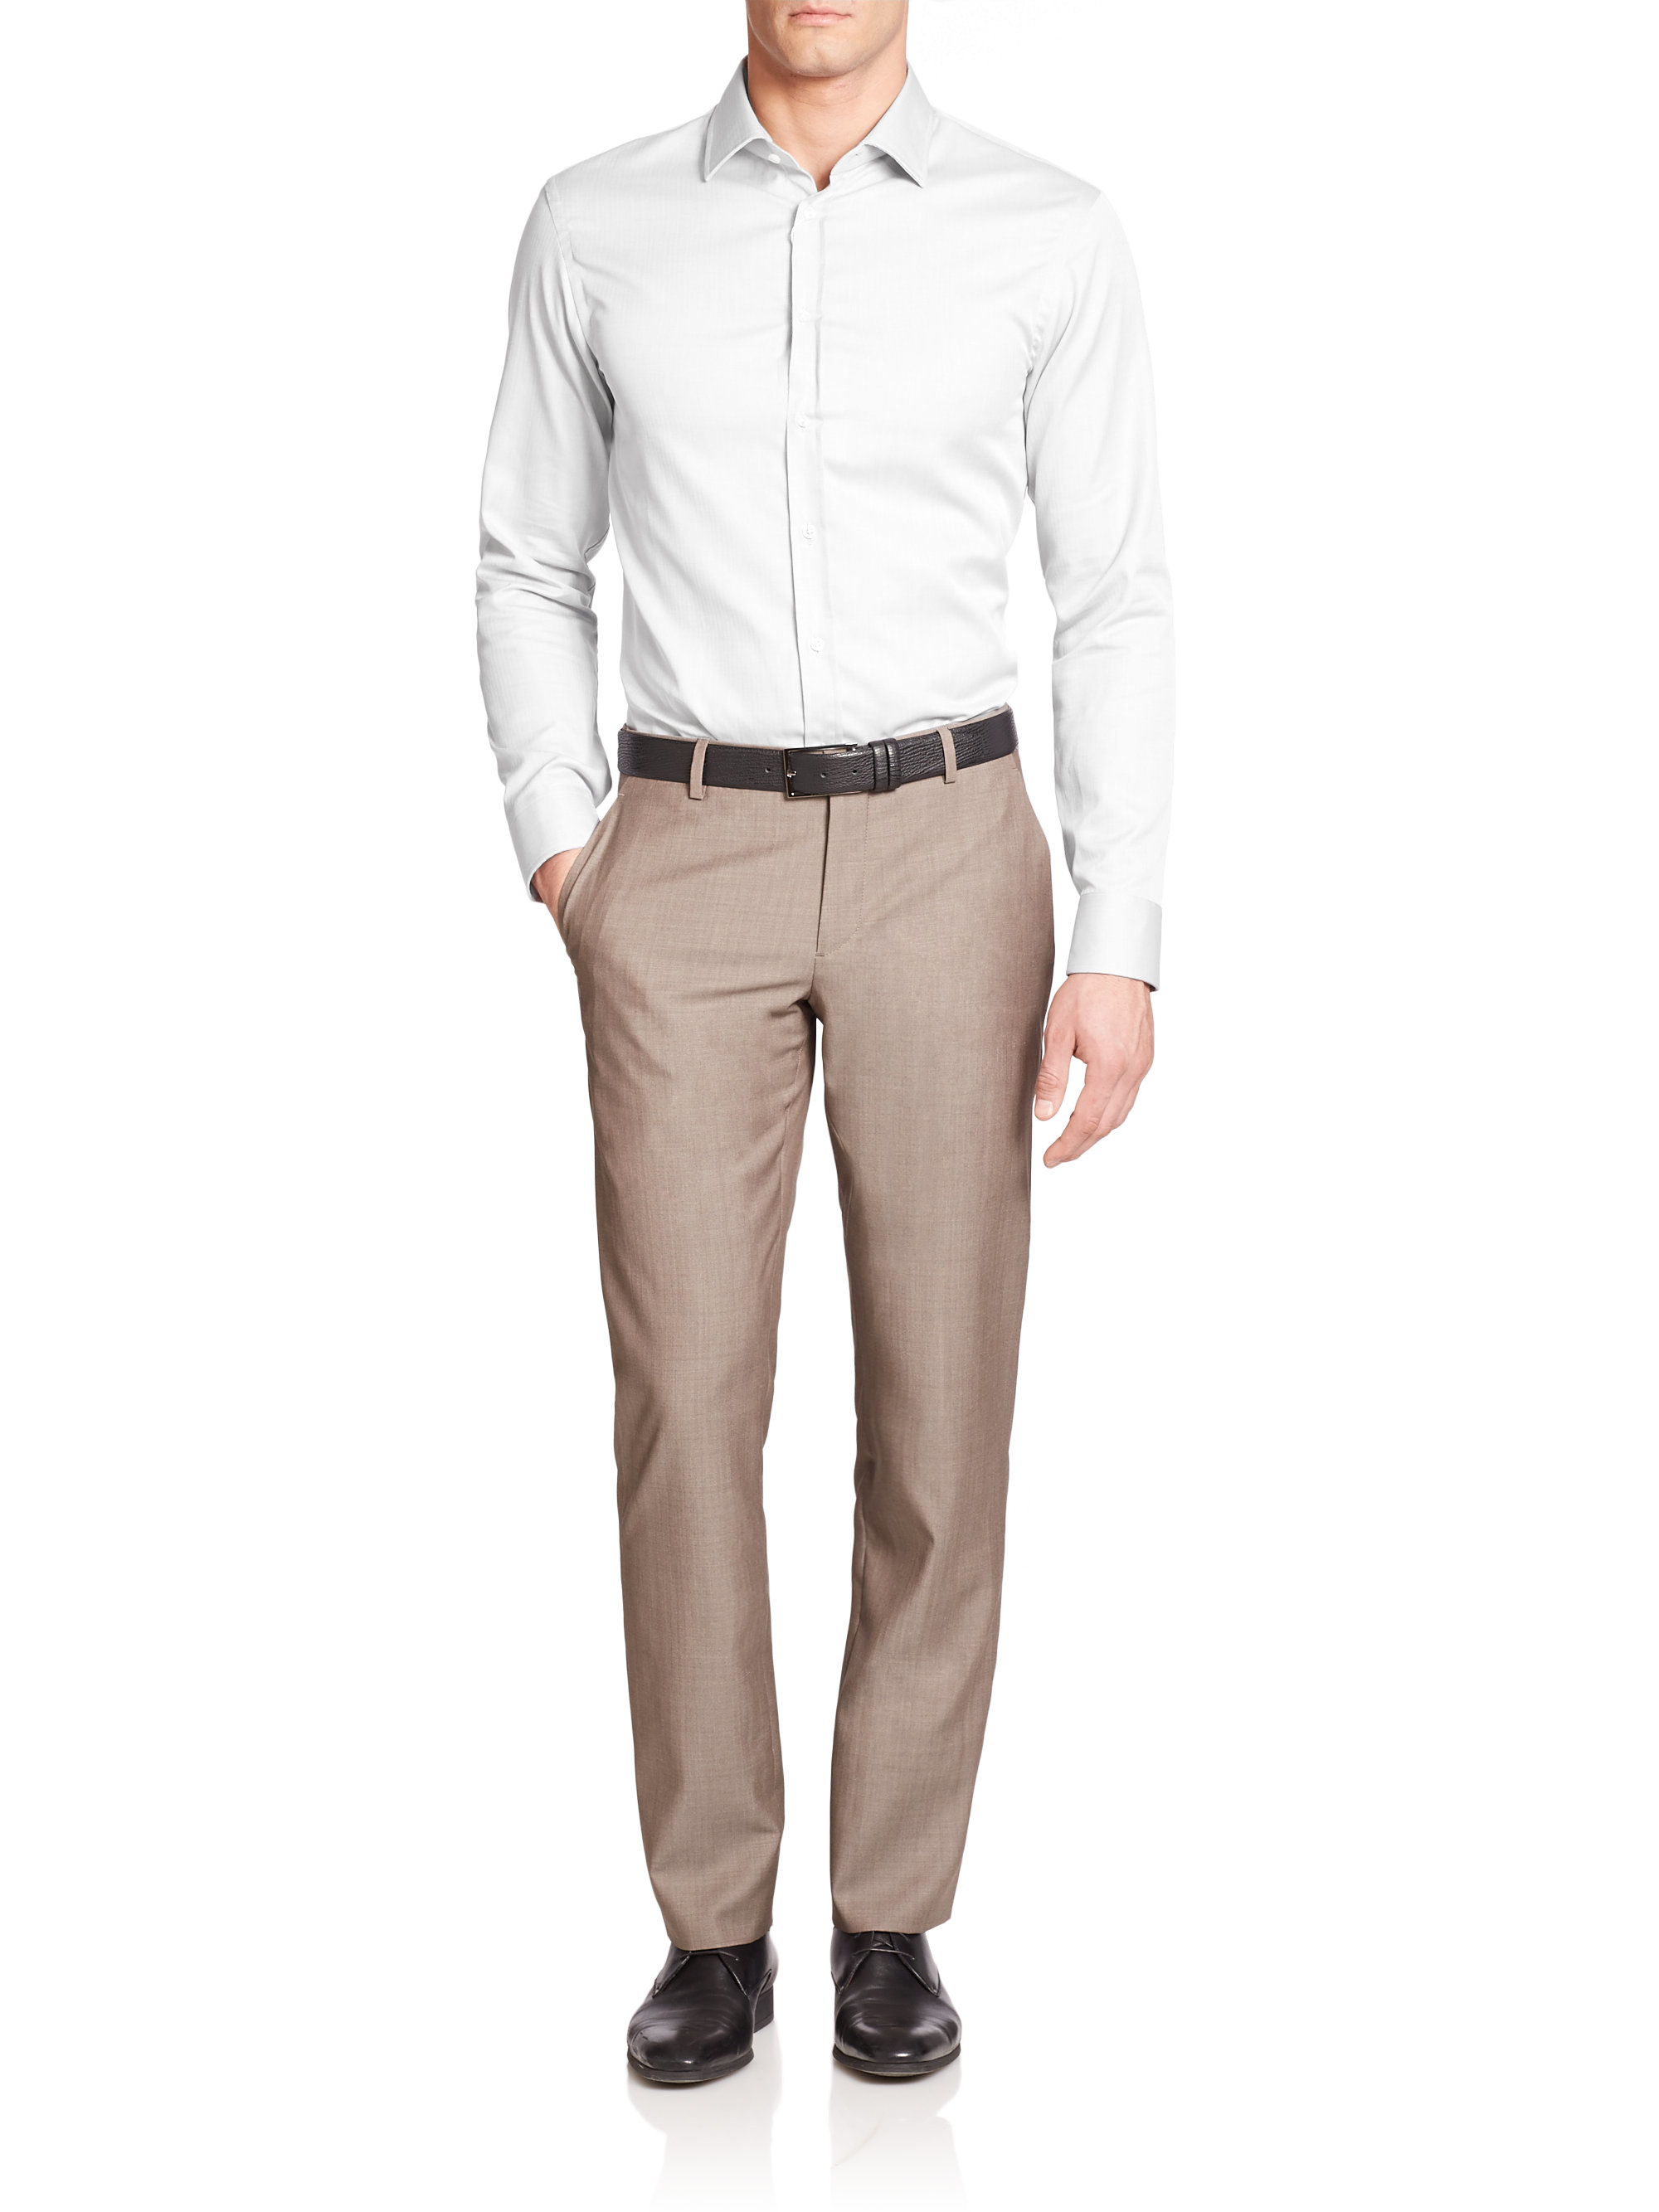 Lyst - Giorgio Armani Textured Wool Dress Pants in Brown for Men